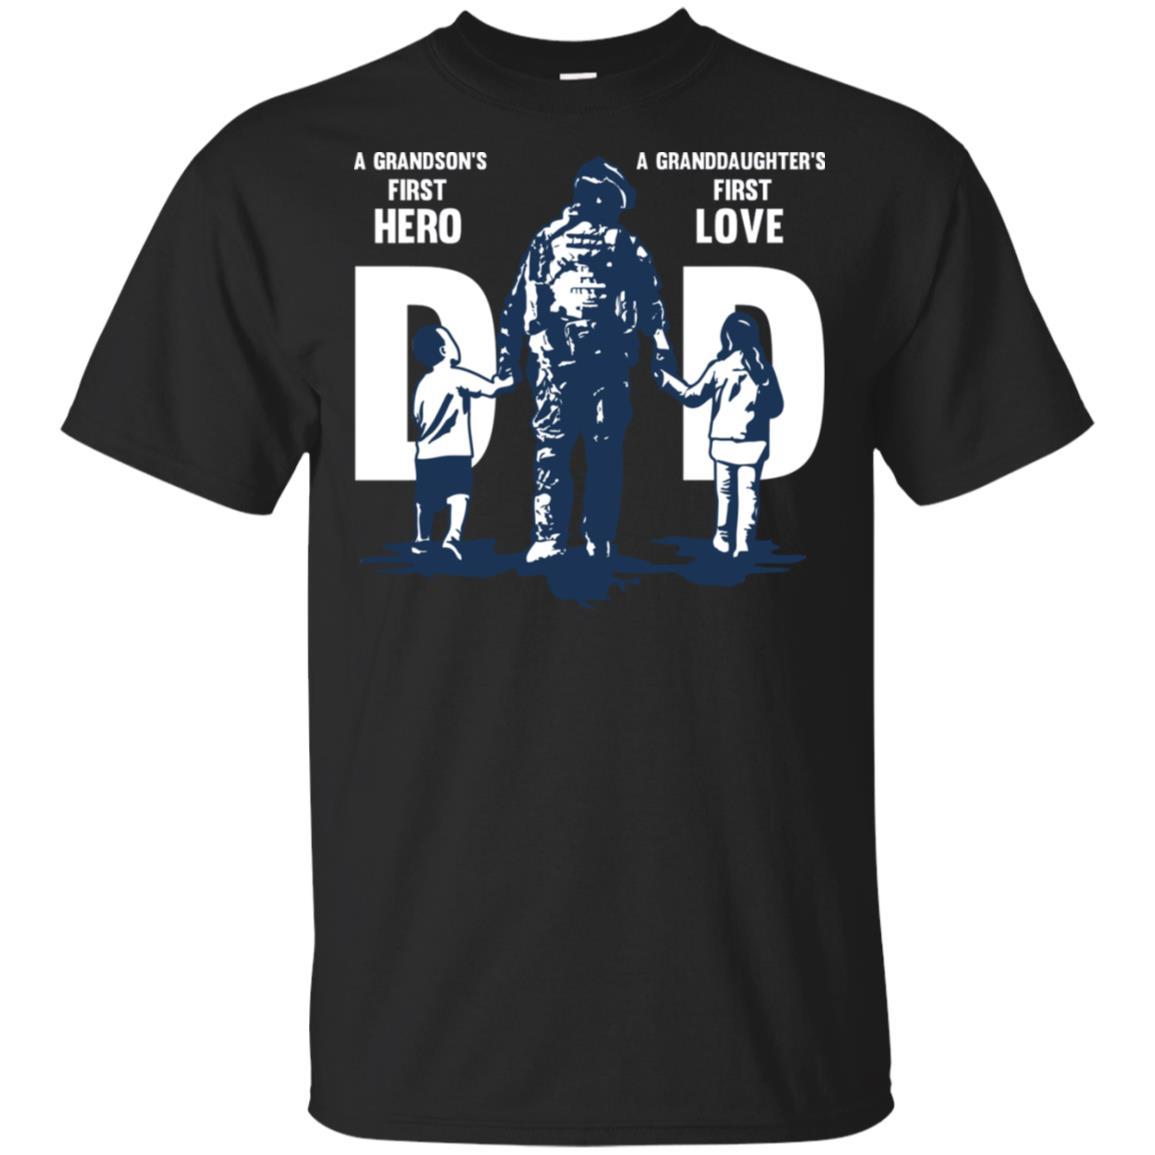 Military T-Shirt "A GRANDSON'S FIRST HERO A GRANDDAUGHTER FIRST LOVE DAD On" Front-TShirt-General-Veterans Nation